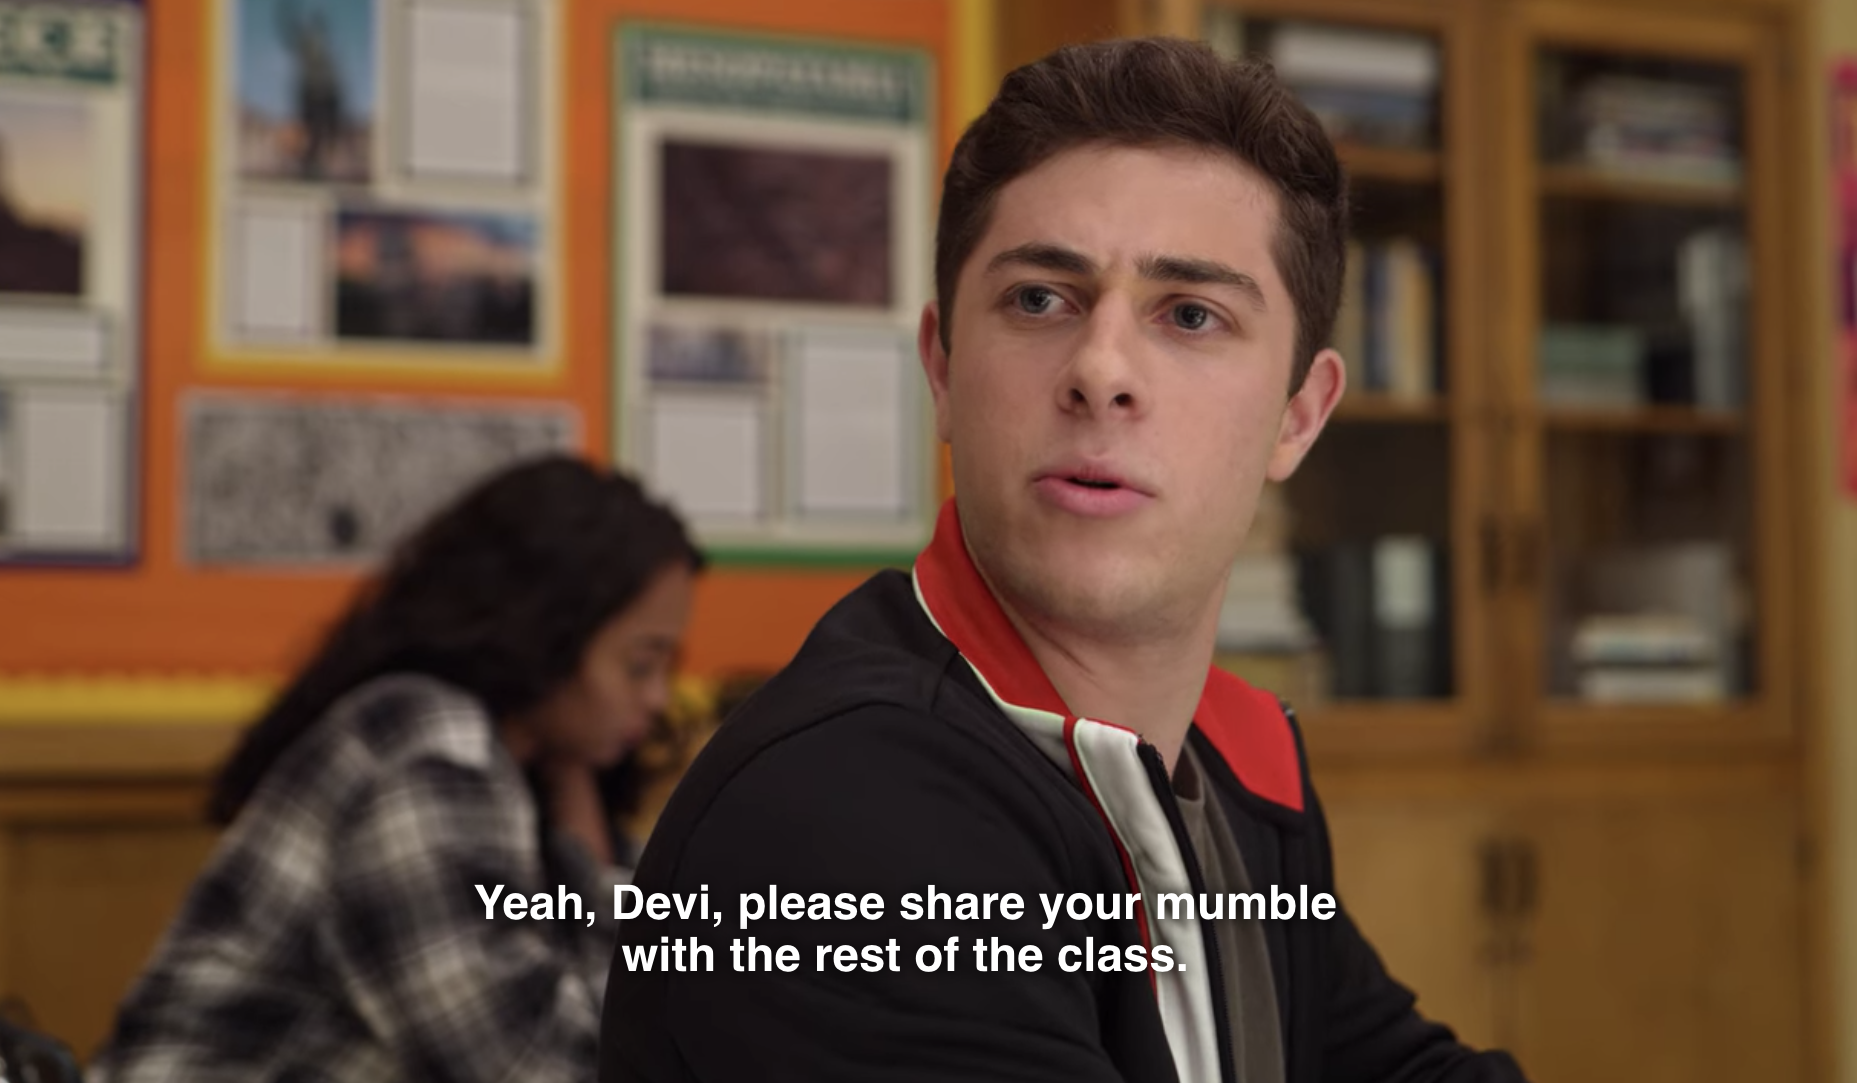 Ben Gross saying "Yeah, Devi, please share with the class."